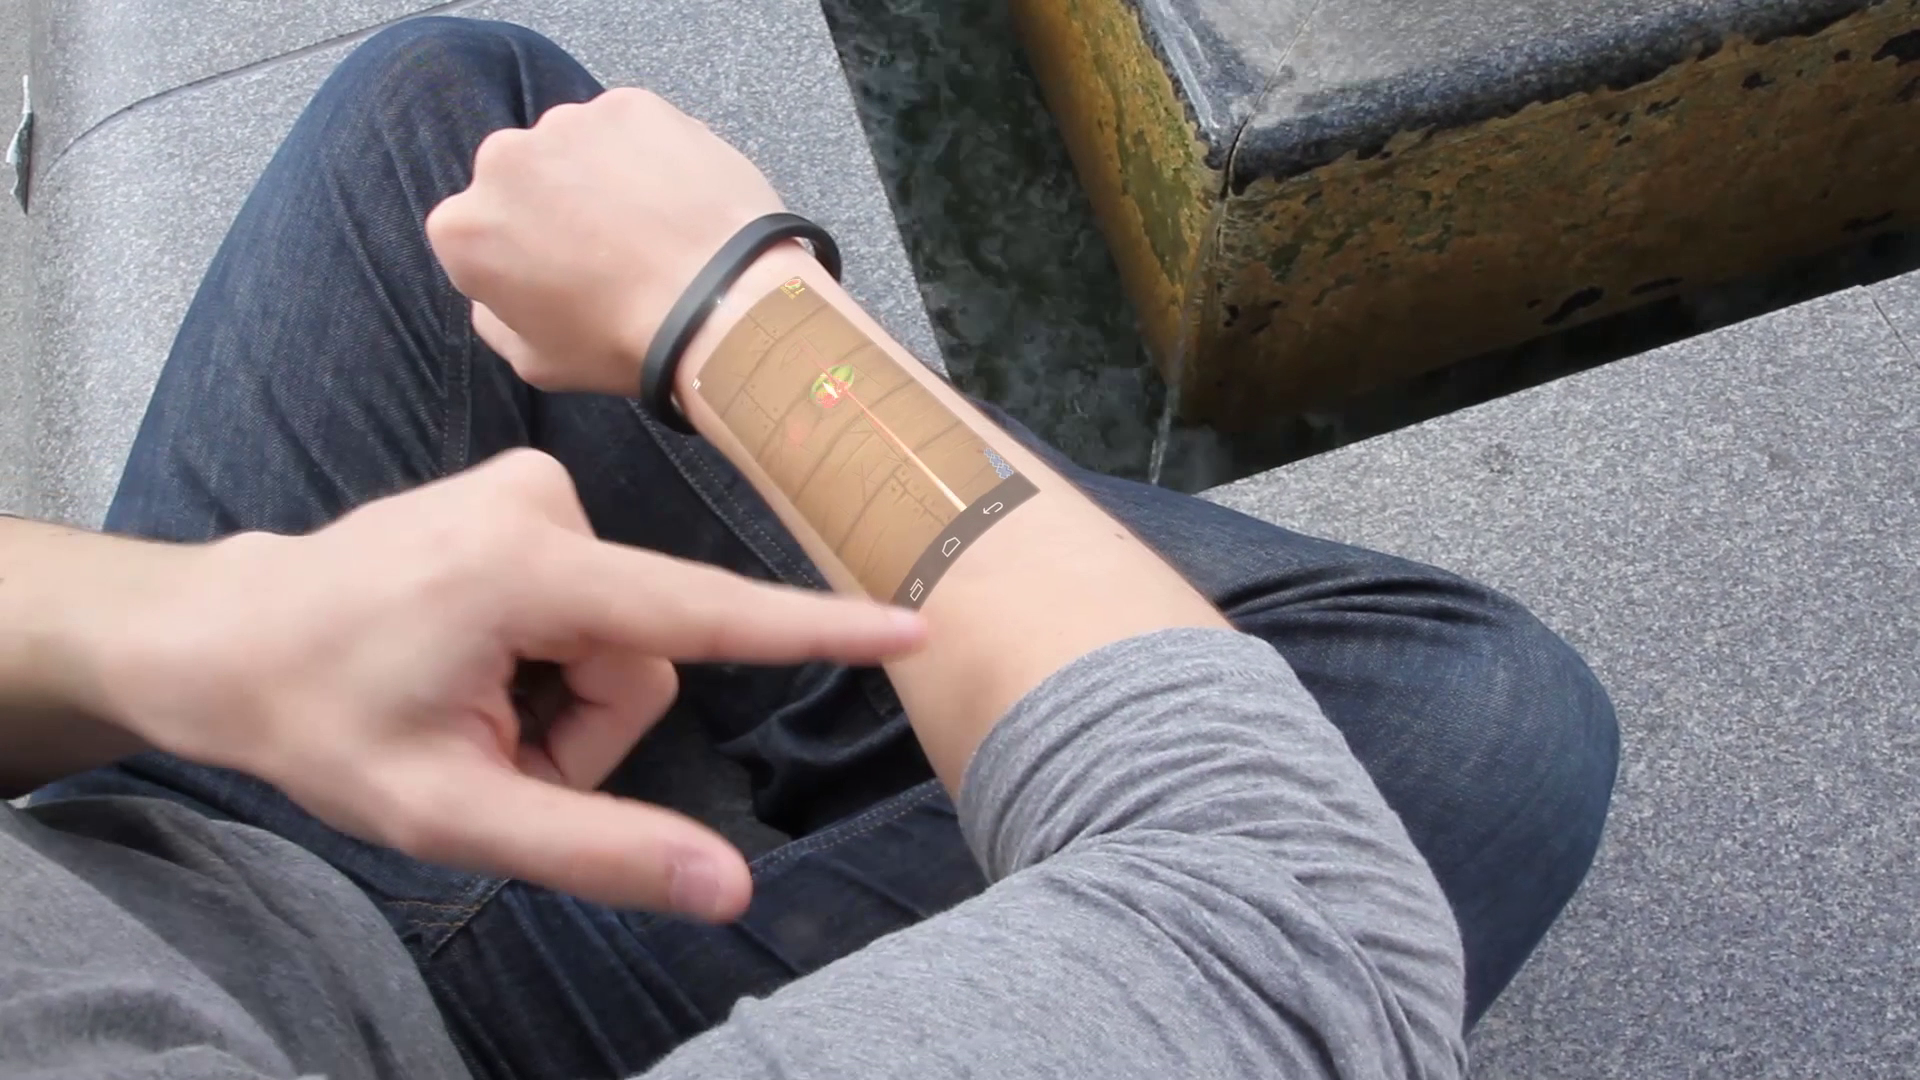 Bracelet to Project Your Phone Screen Onto Your Arm